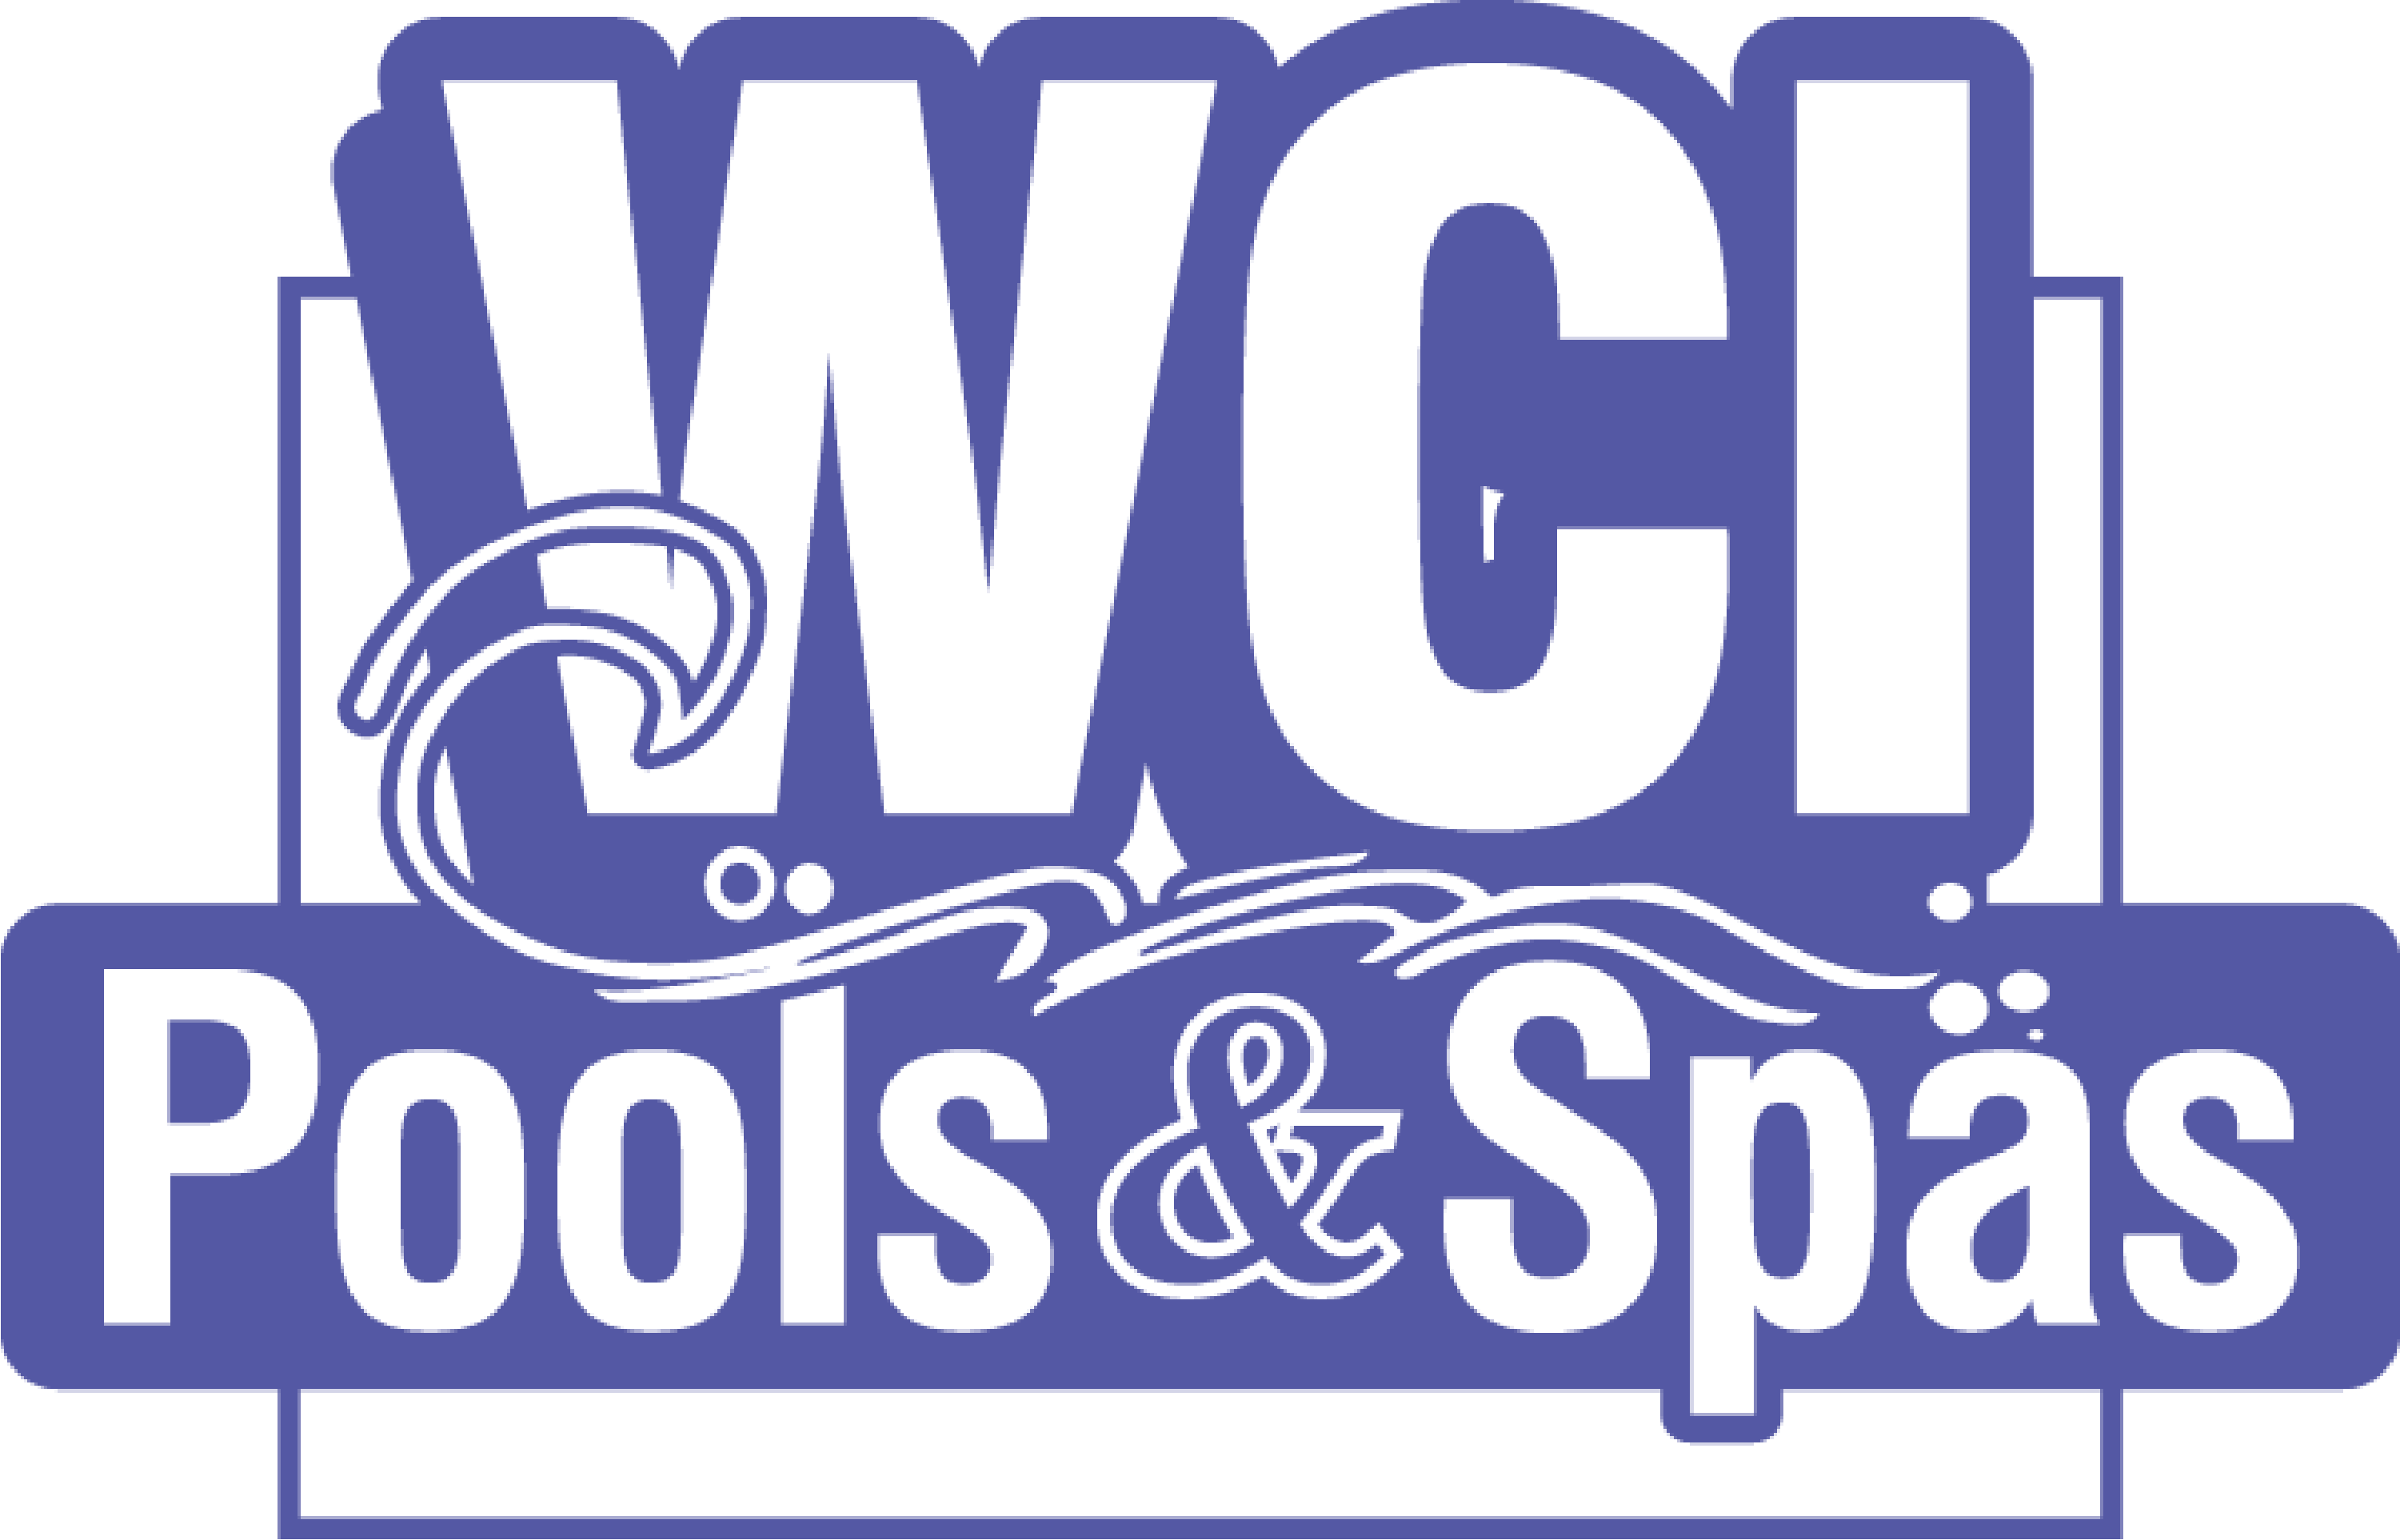 WCI Pools and Spas